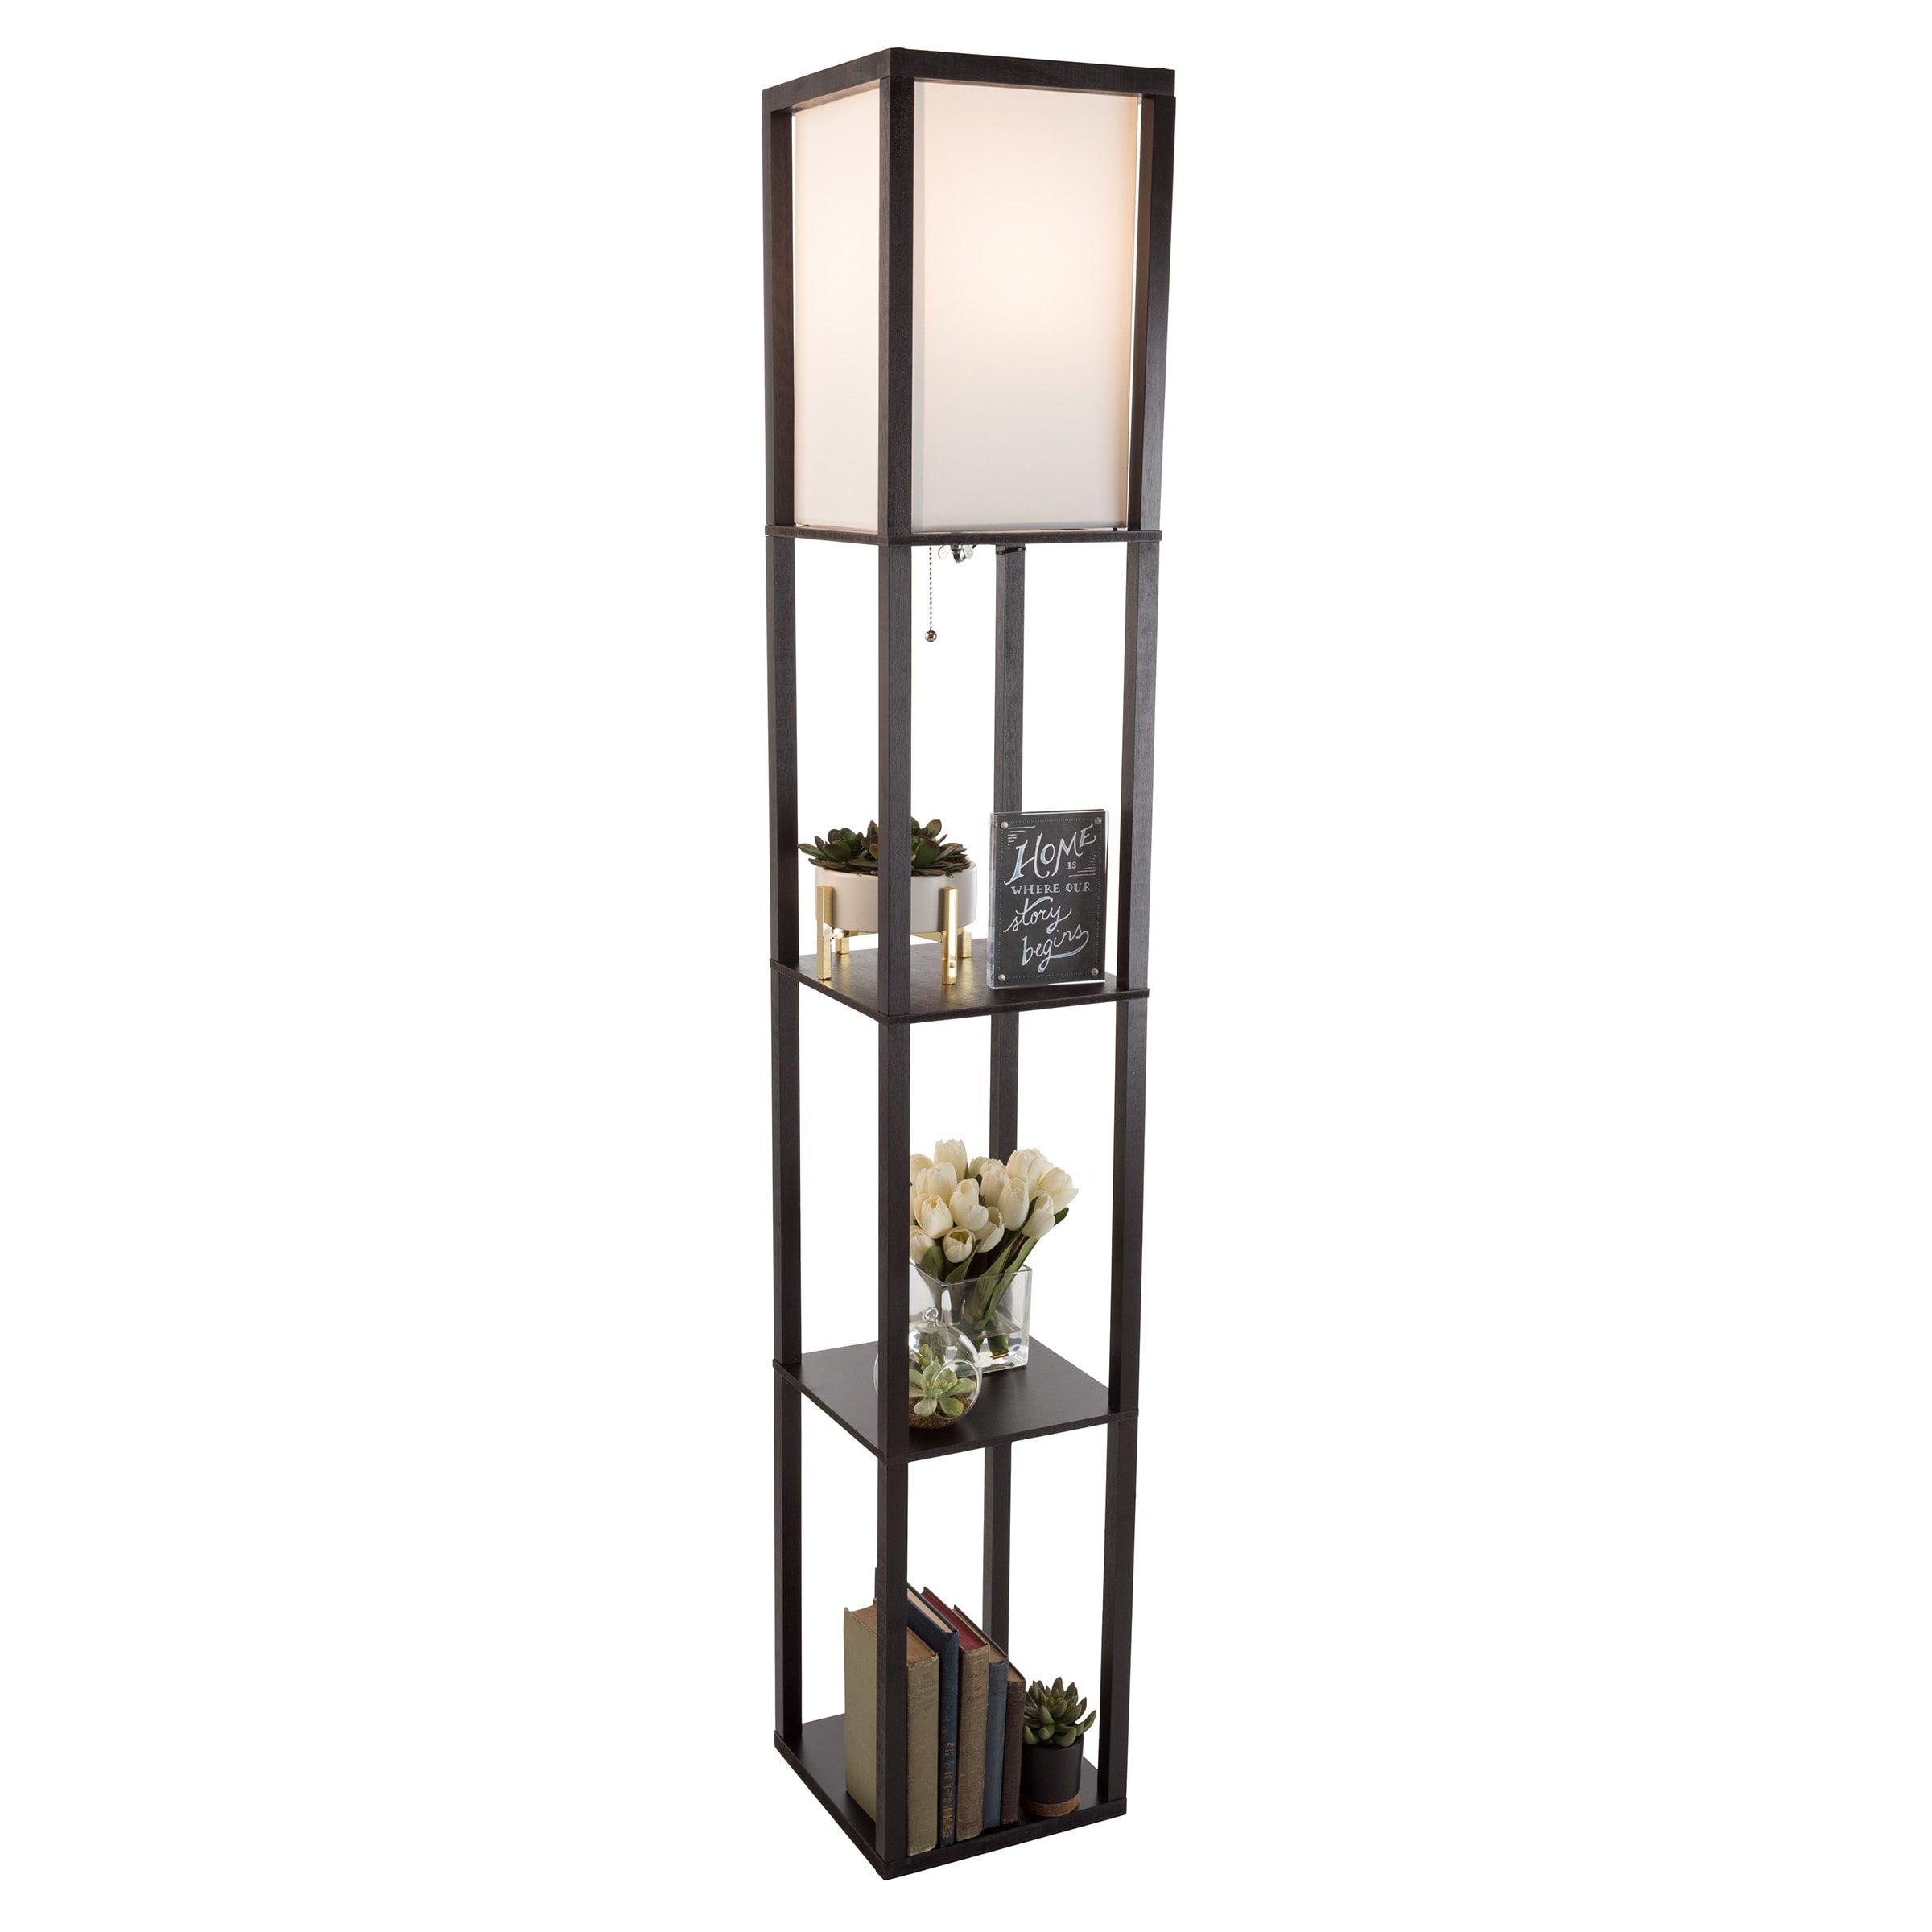 Hastings Home Led Floor Lamp With 3 Shelves, Black  (View 13 of 15)